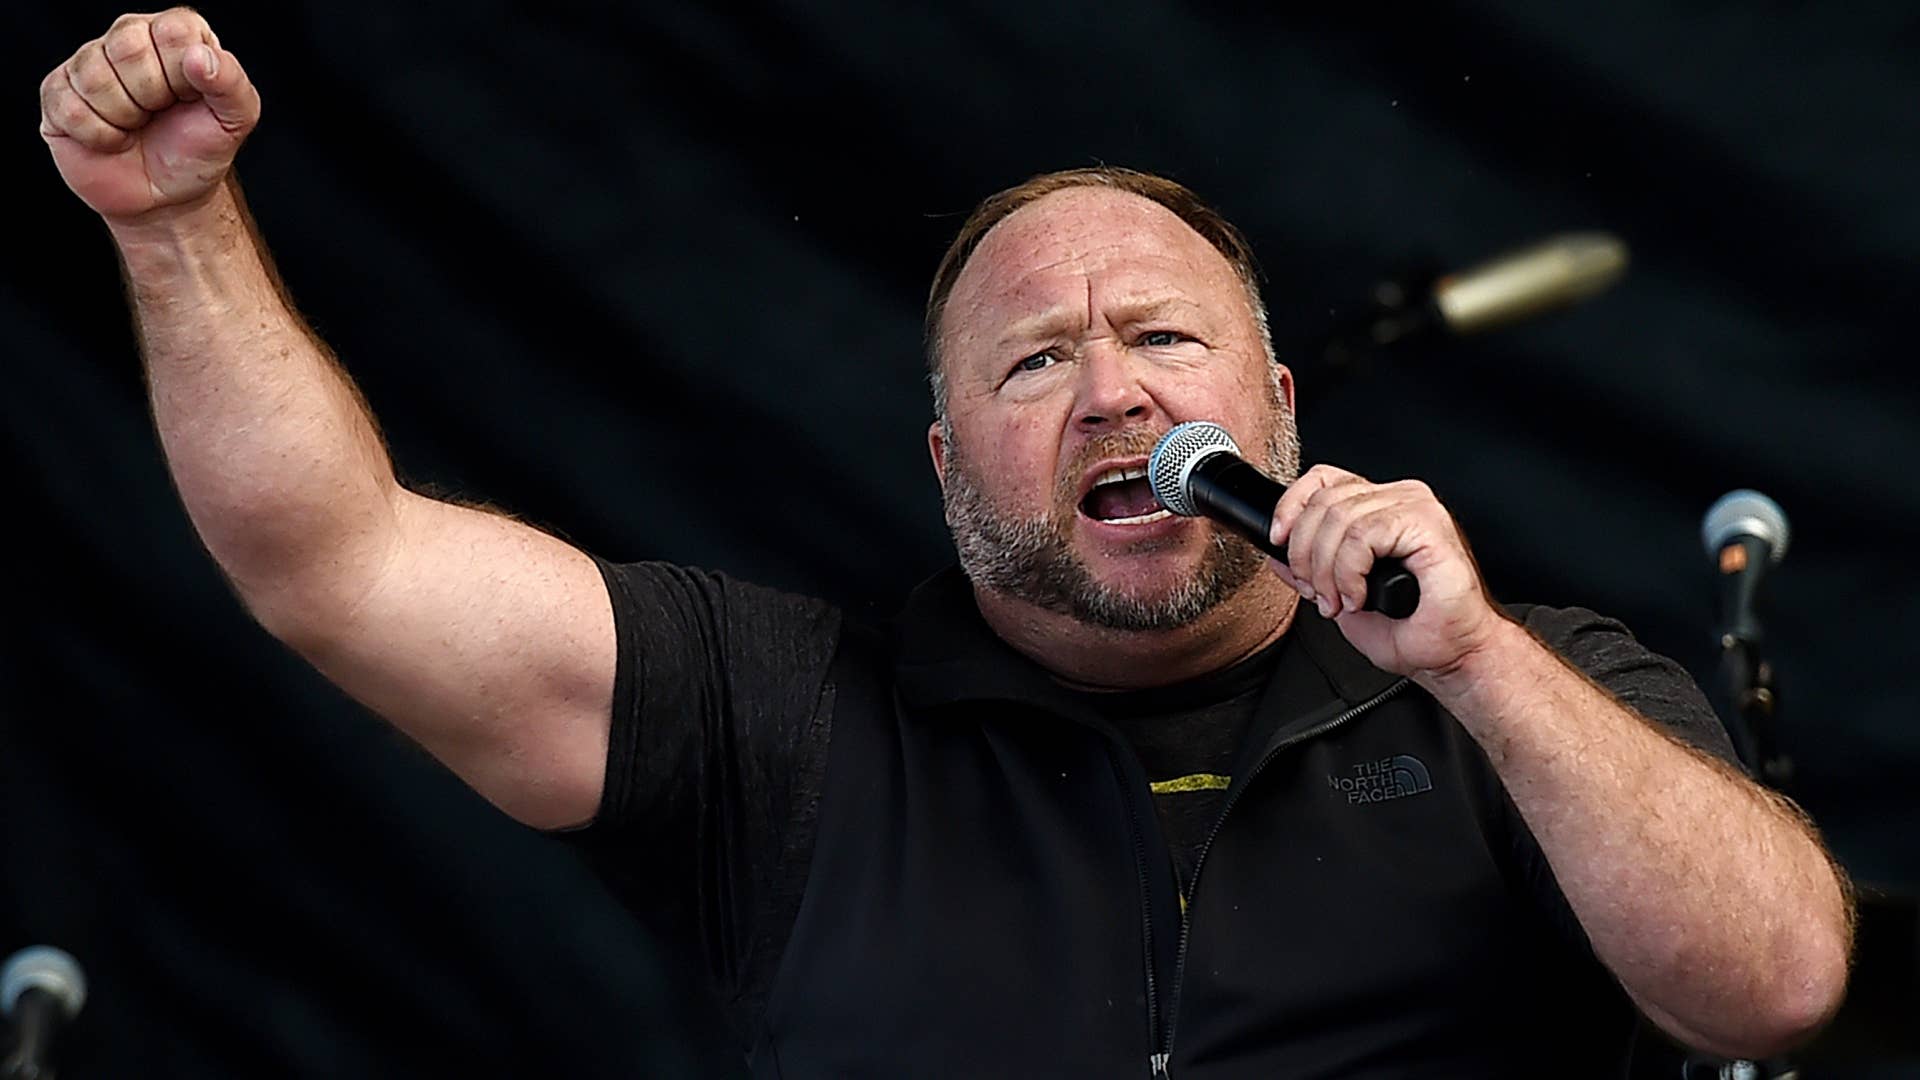 Alex Jones is pictured screaming and holding up a fist